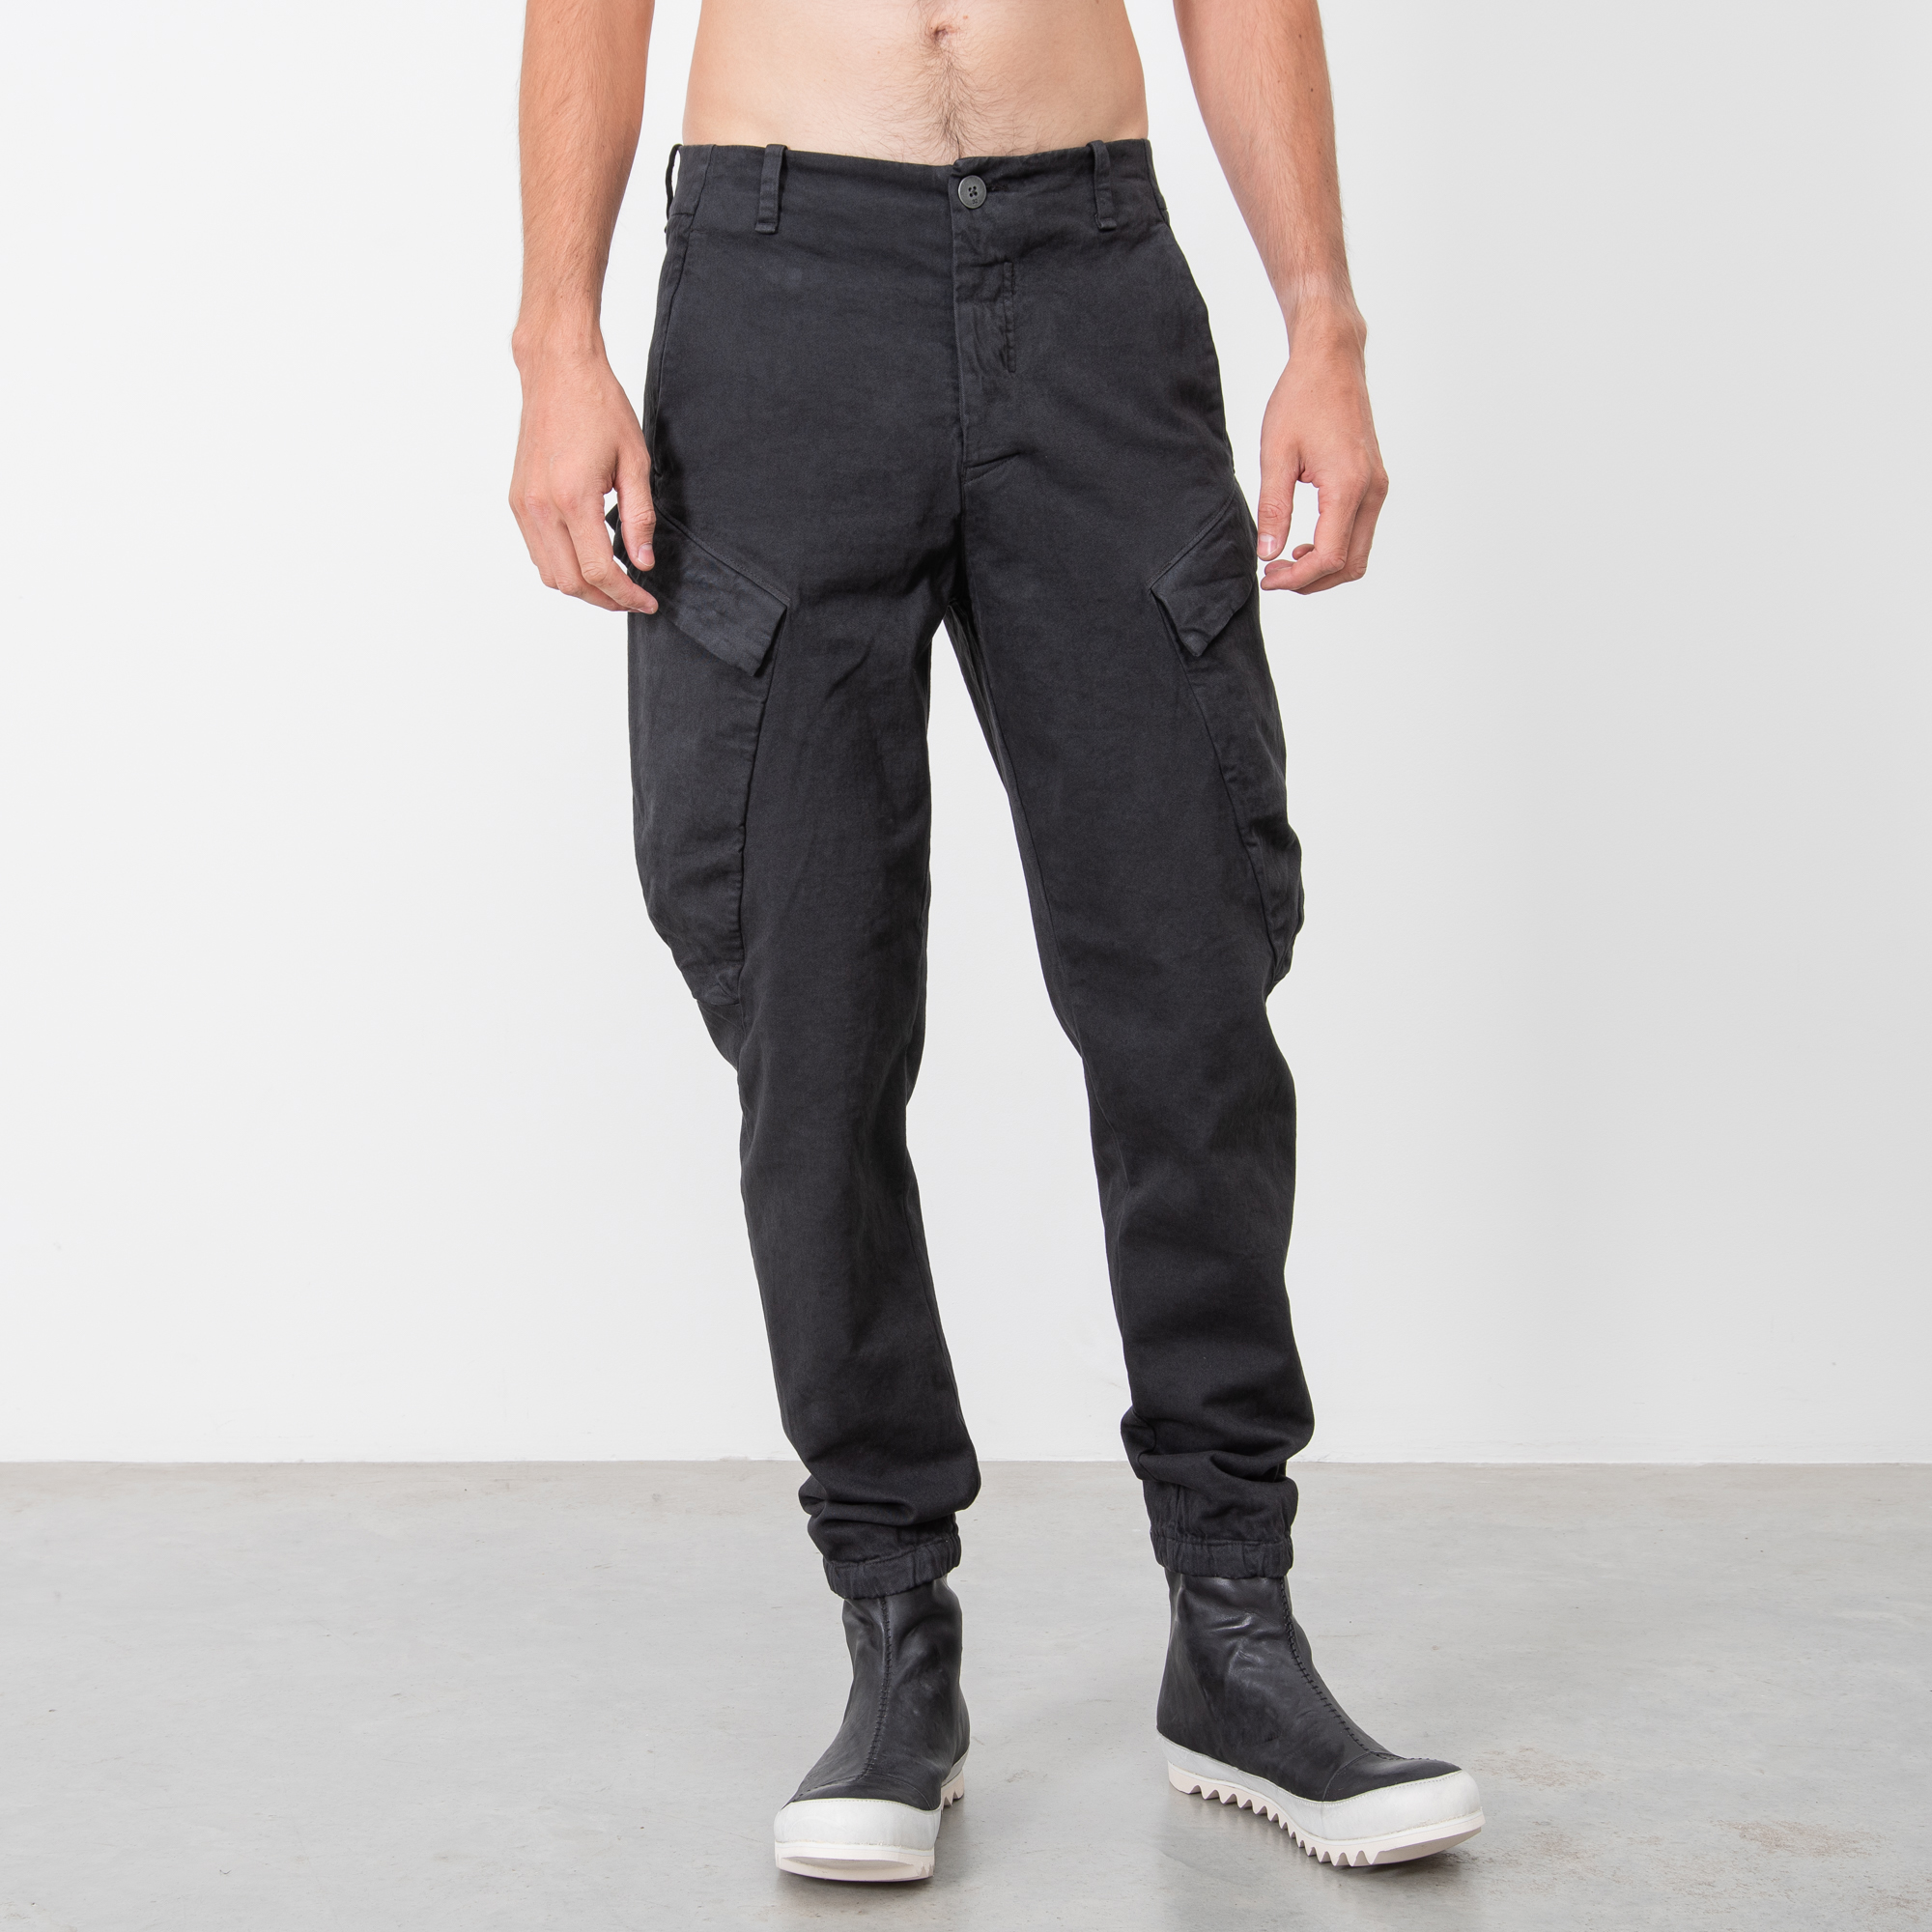 CHARCOAL CARGO PANTS|wolfensson